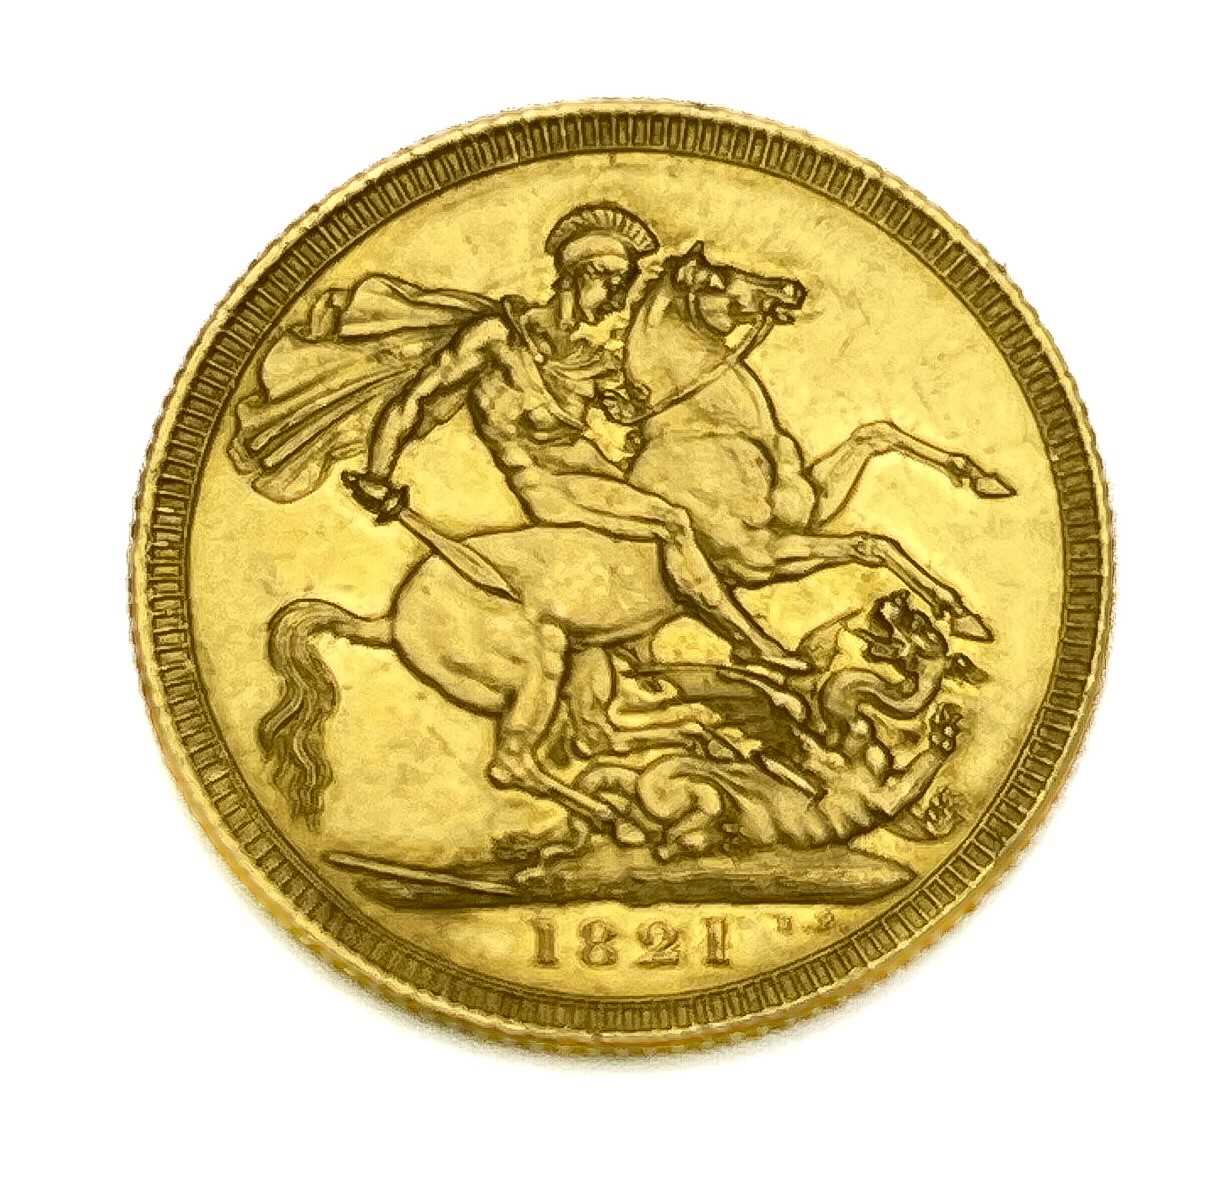 George IV, Sovereign, 1821. S3800 - Image 2 of 2